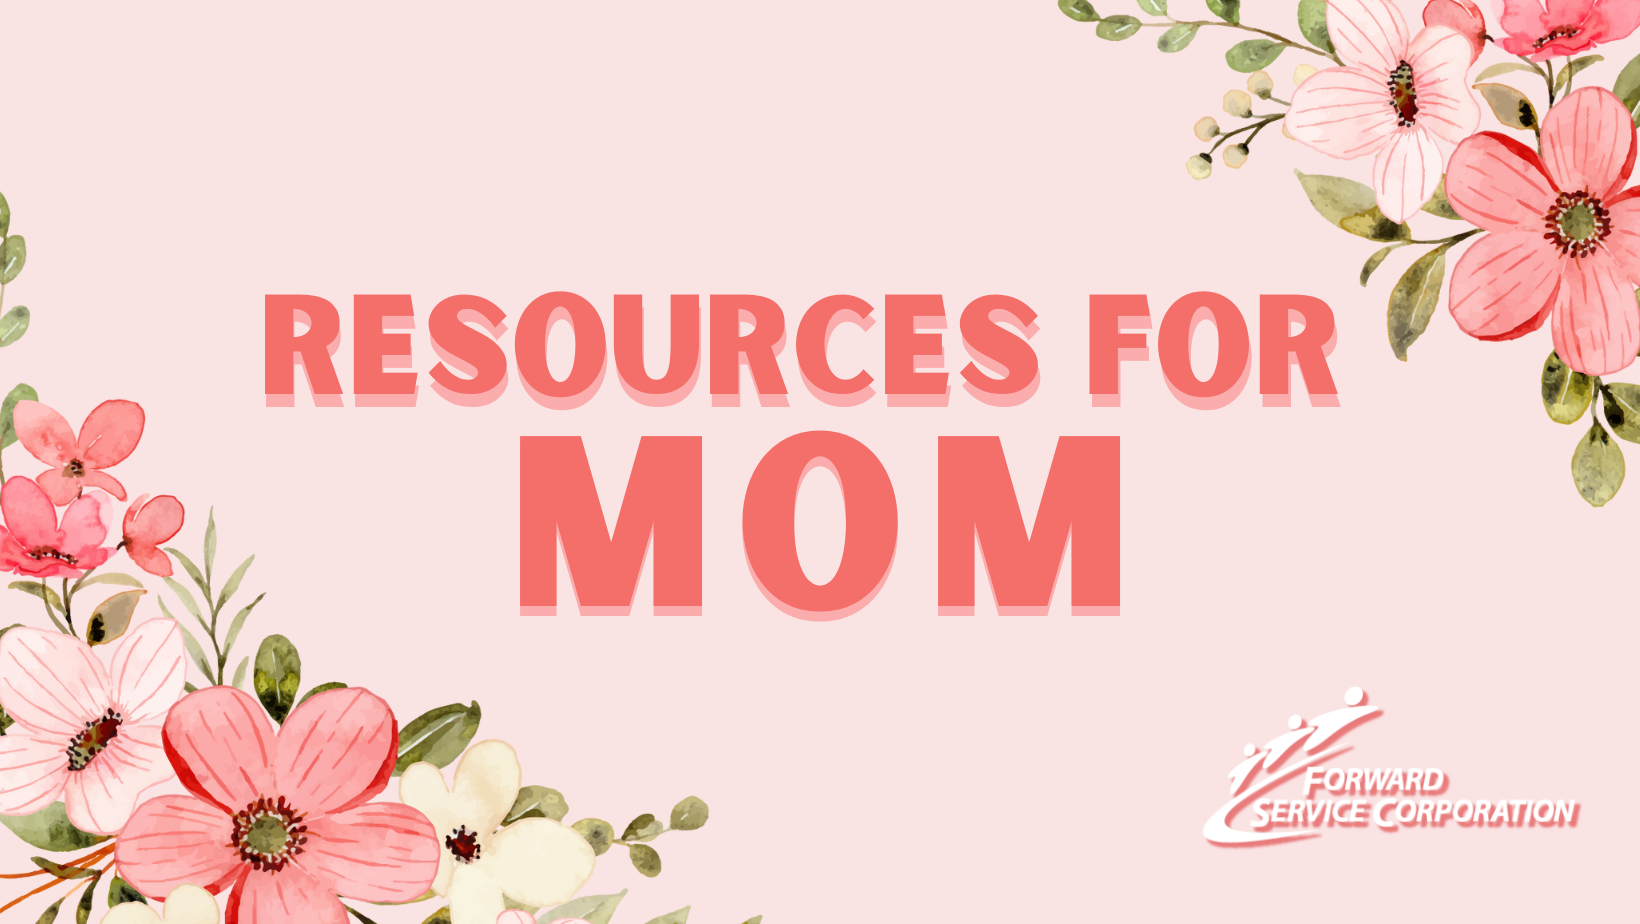 Resources for Mom